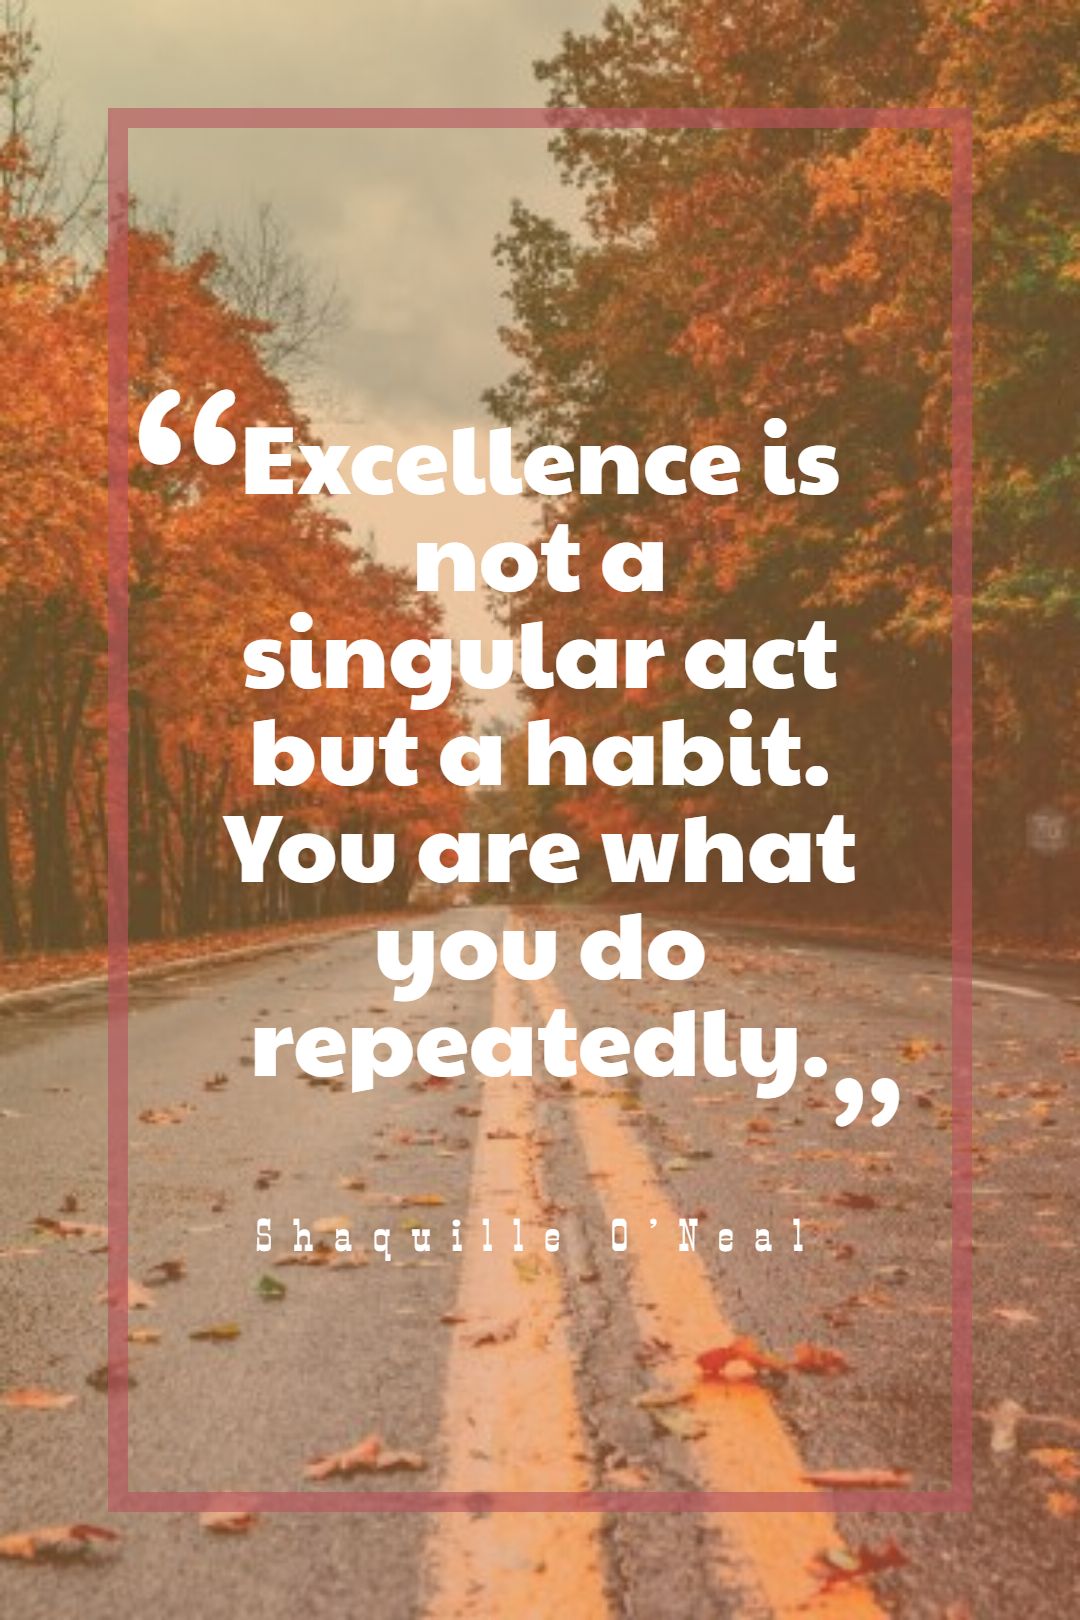 Excellence is not a singular act but a habit. You are what you do repeatedly.